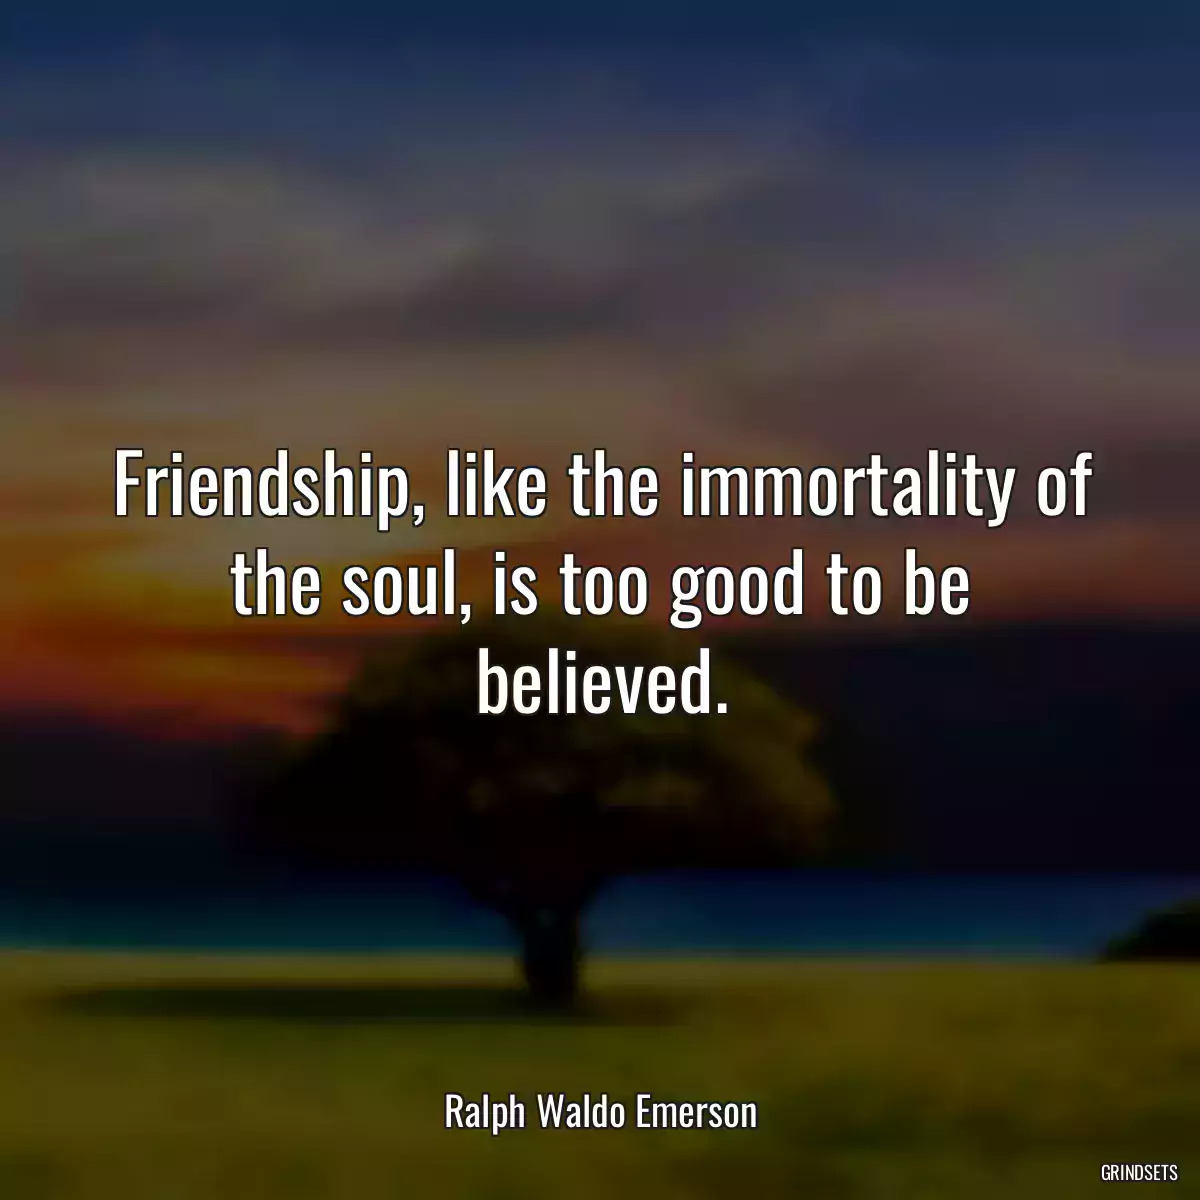 Friendship, like the immortality of the soul, is too good to be believed.